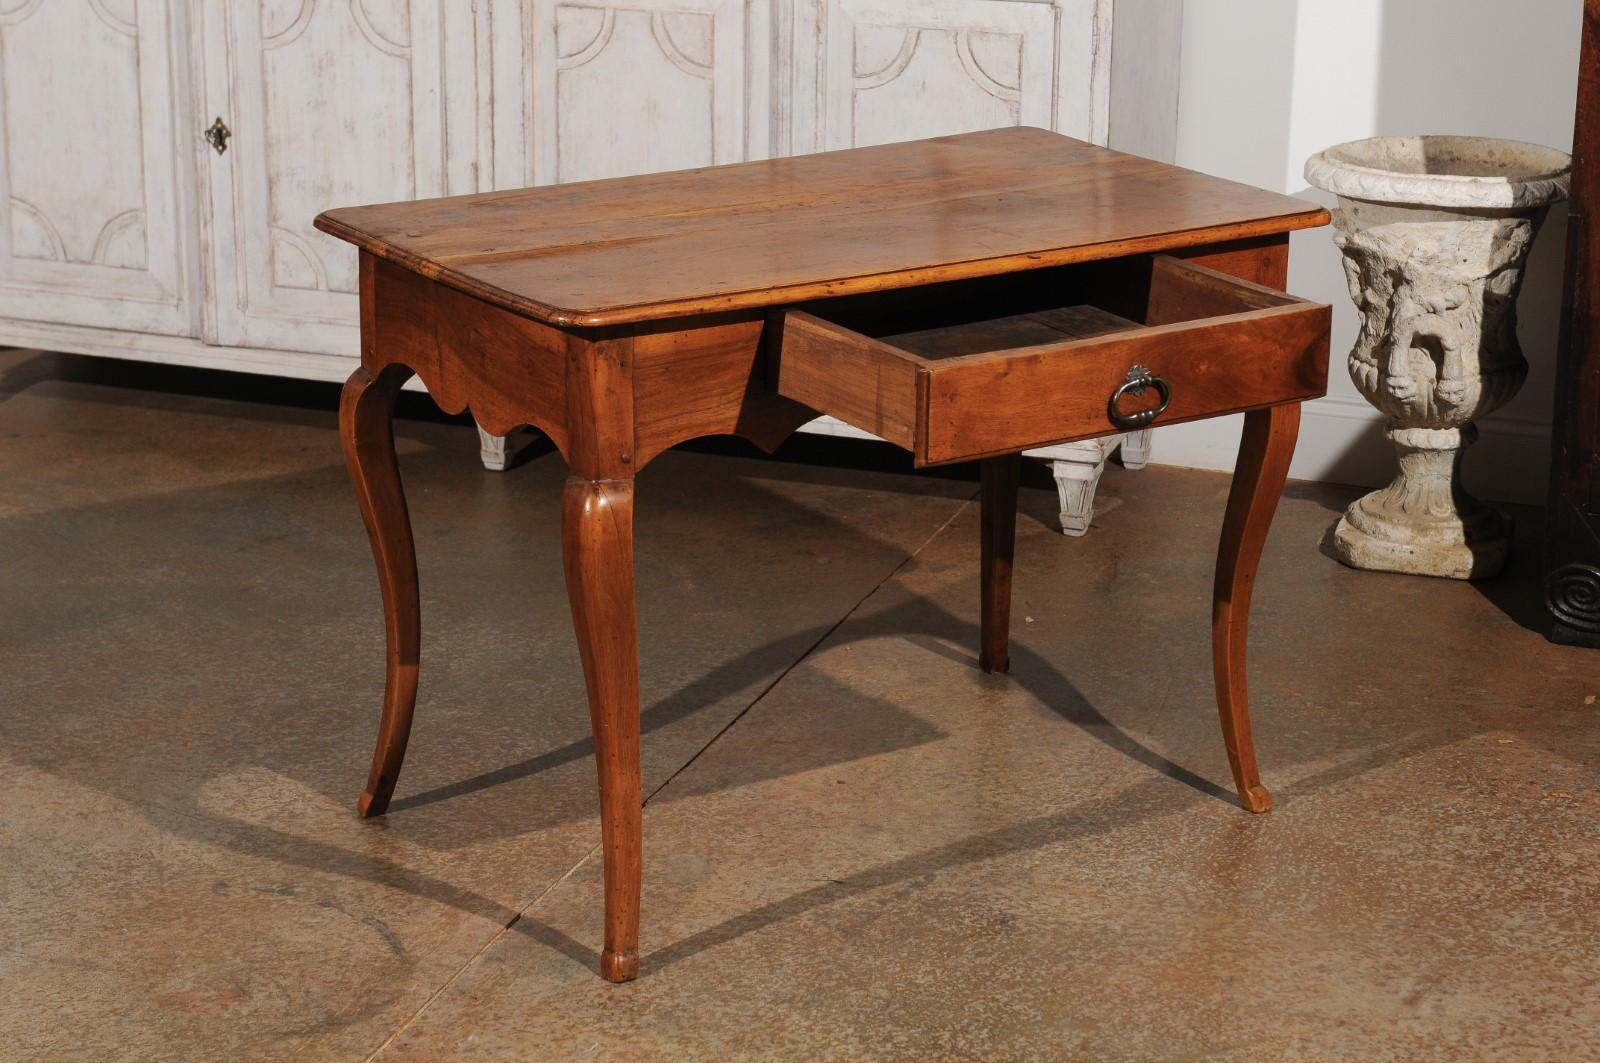 French Period Louis XV 18th Century Walnut Table with Drawer and Cabriole Legs 1